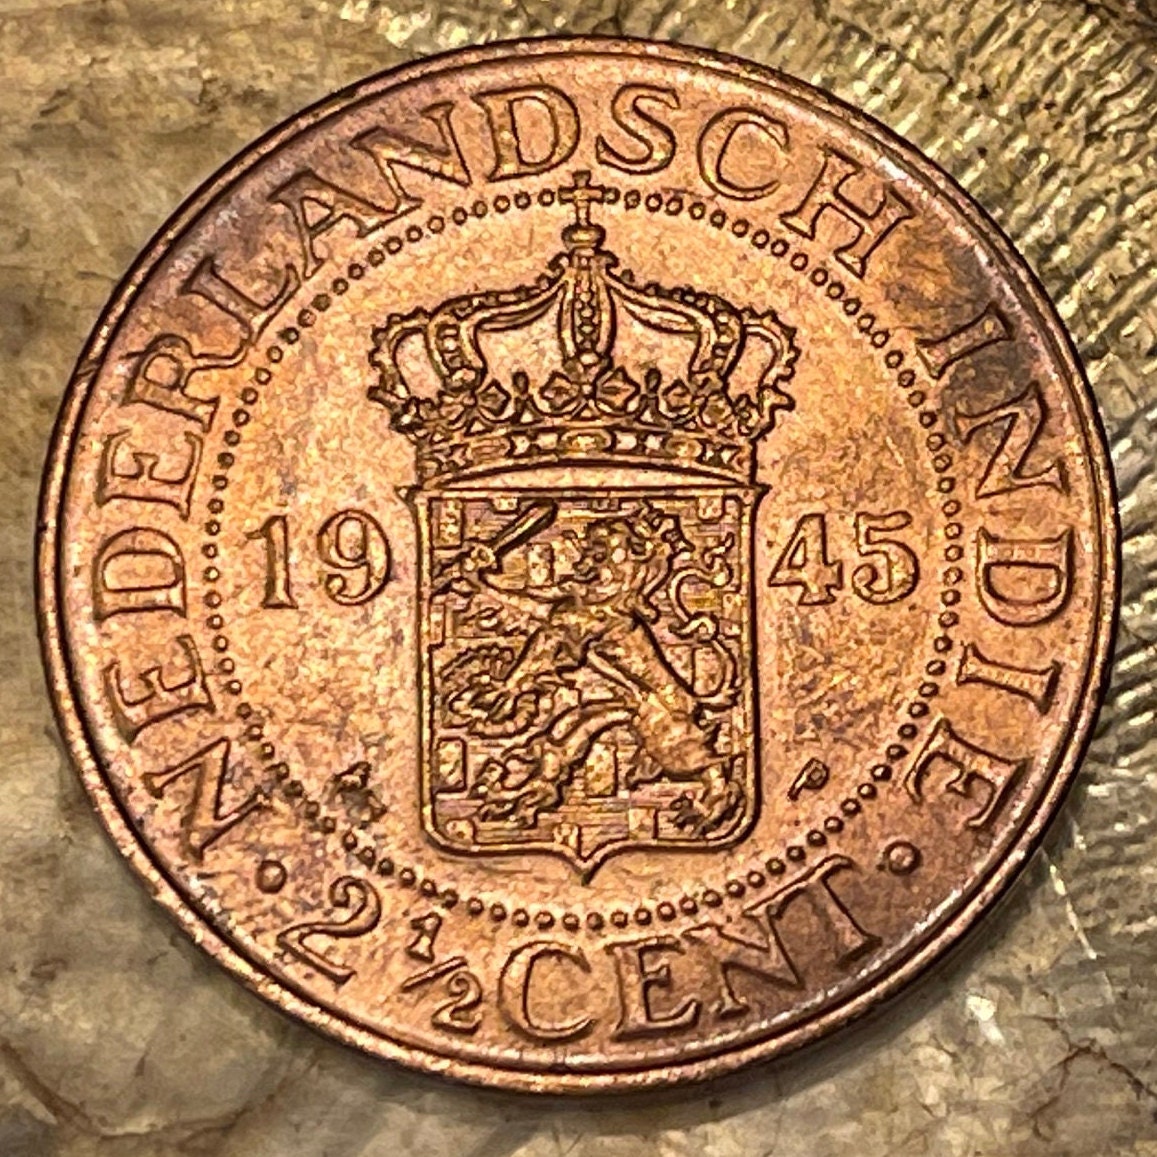 Lion with Sword and Arrows 2 1/2 Cents Netherlands Indies Authentic Coin Money for Jewelry (Dutch East Indies) 1945 (CONDITION: EXTRA FINE)